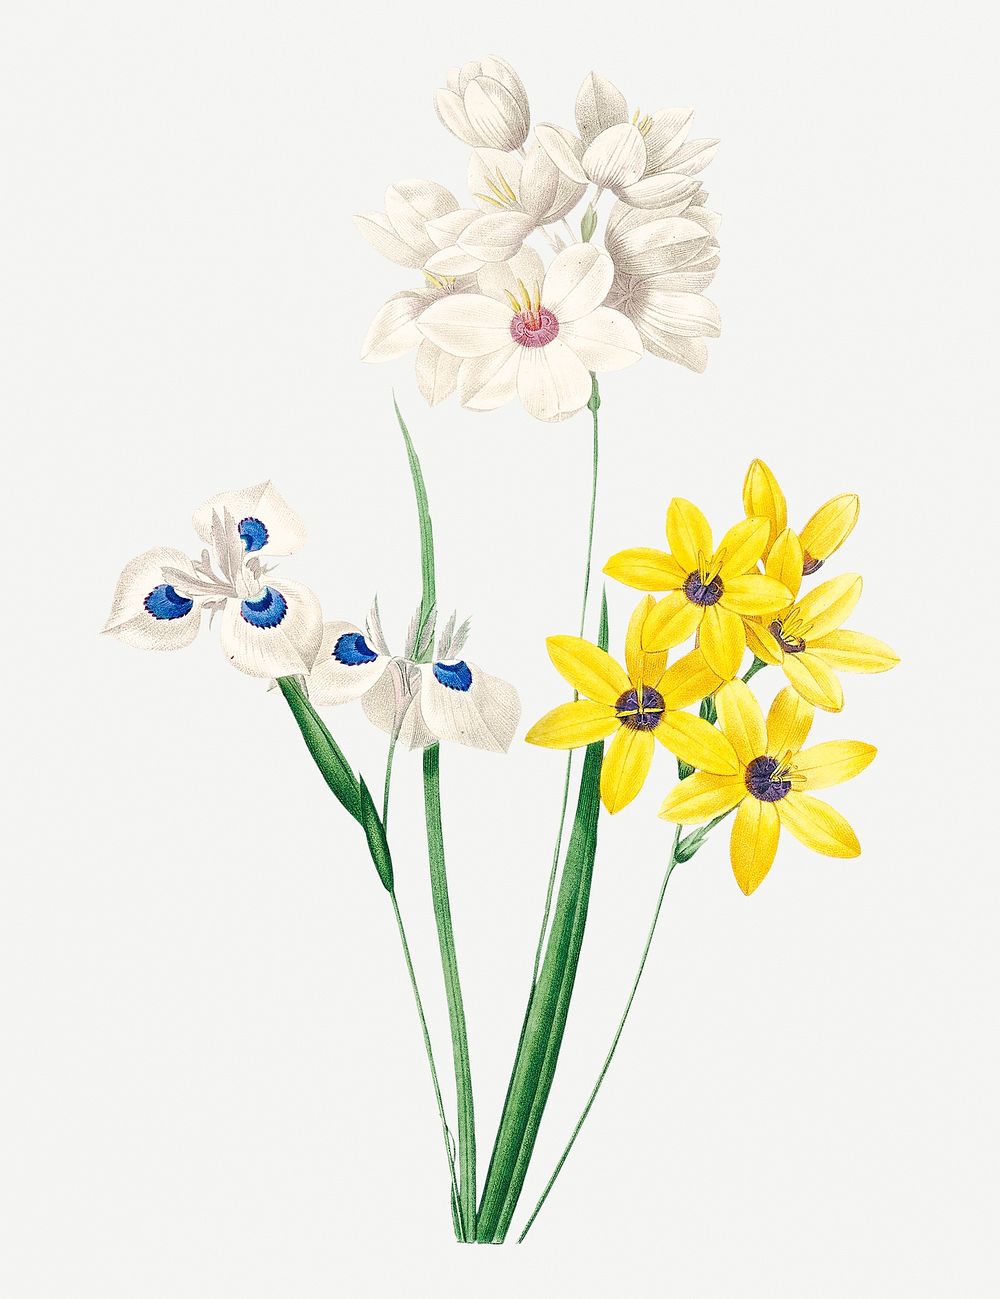 Corn lily flower psd botanical illustration, remixed from artworks by Pierre-Joseph Redout&eacute;